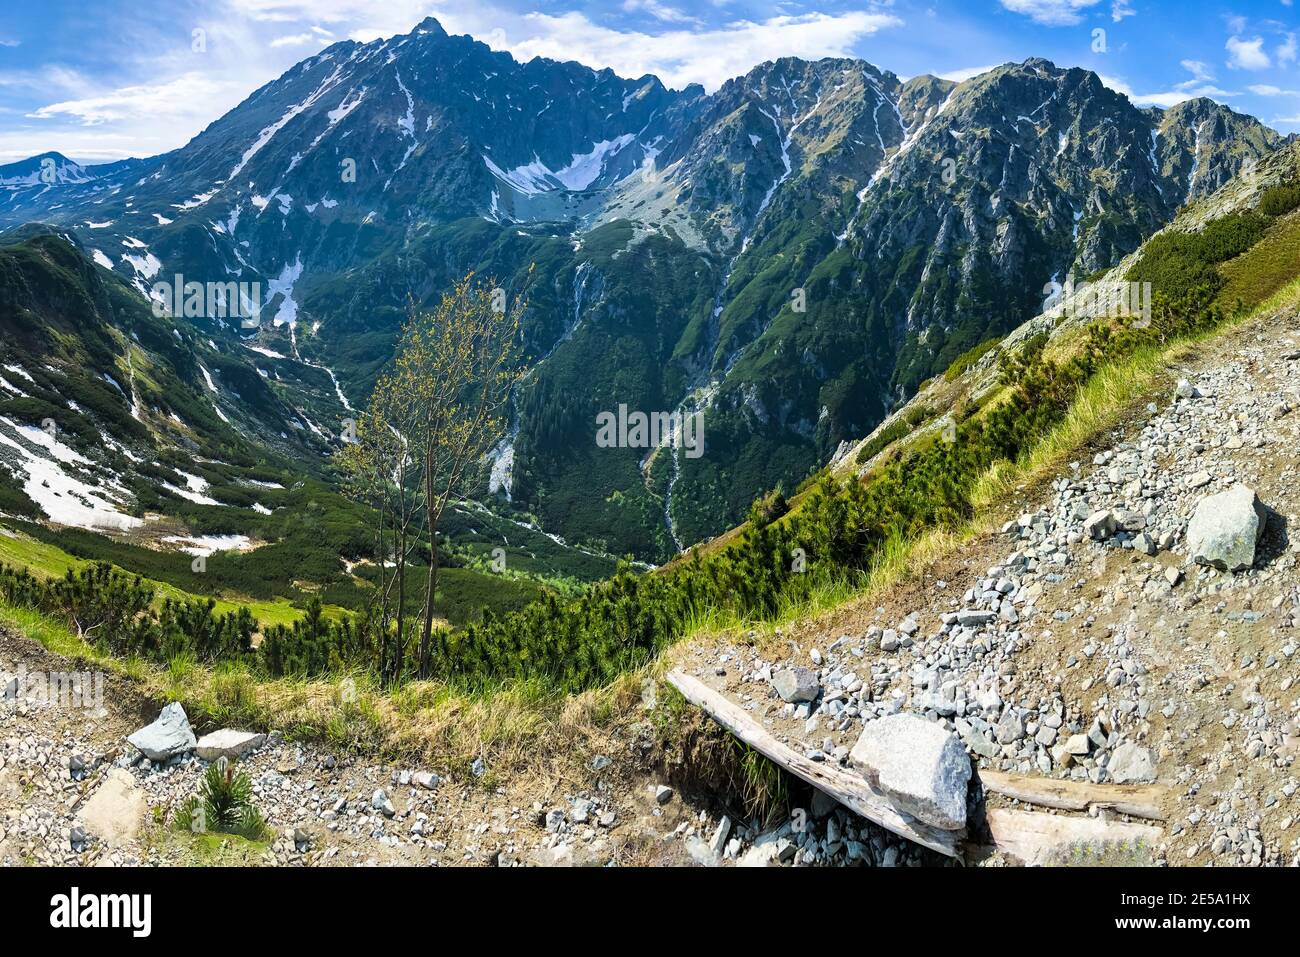 Scenic valley with the Tatra Mountains in the background, Pola Stock Photo